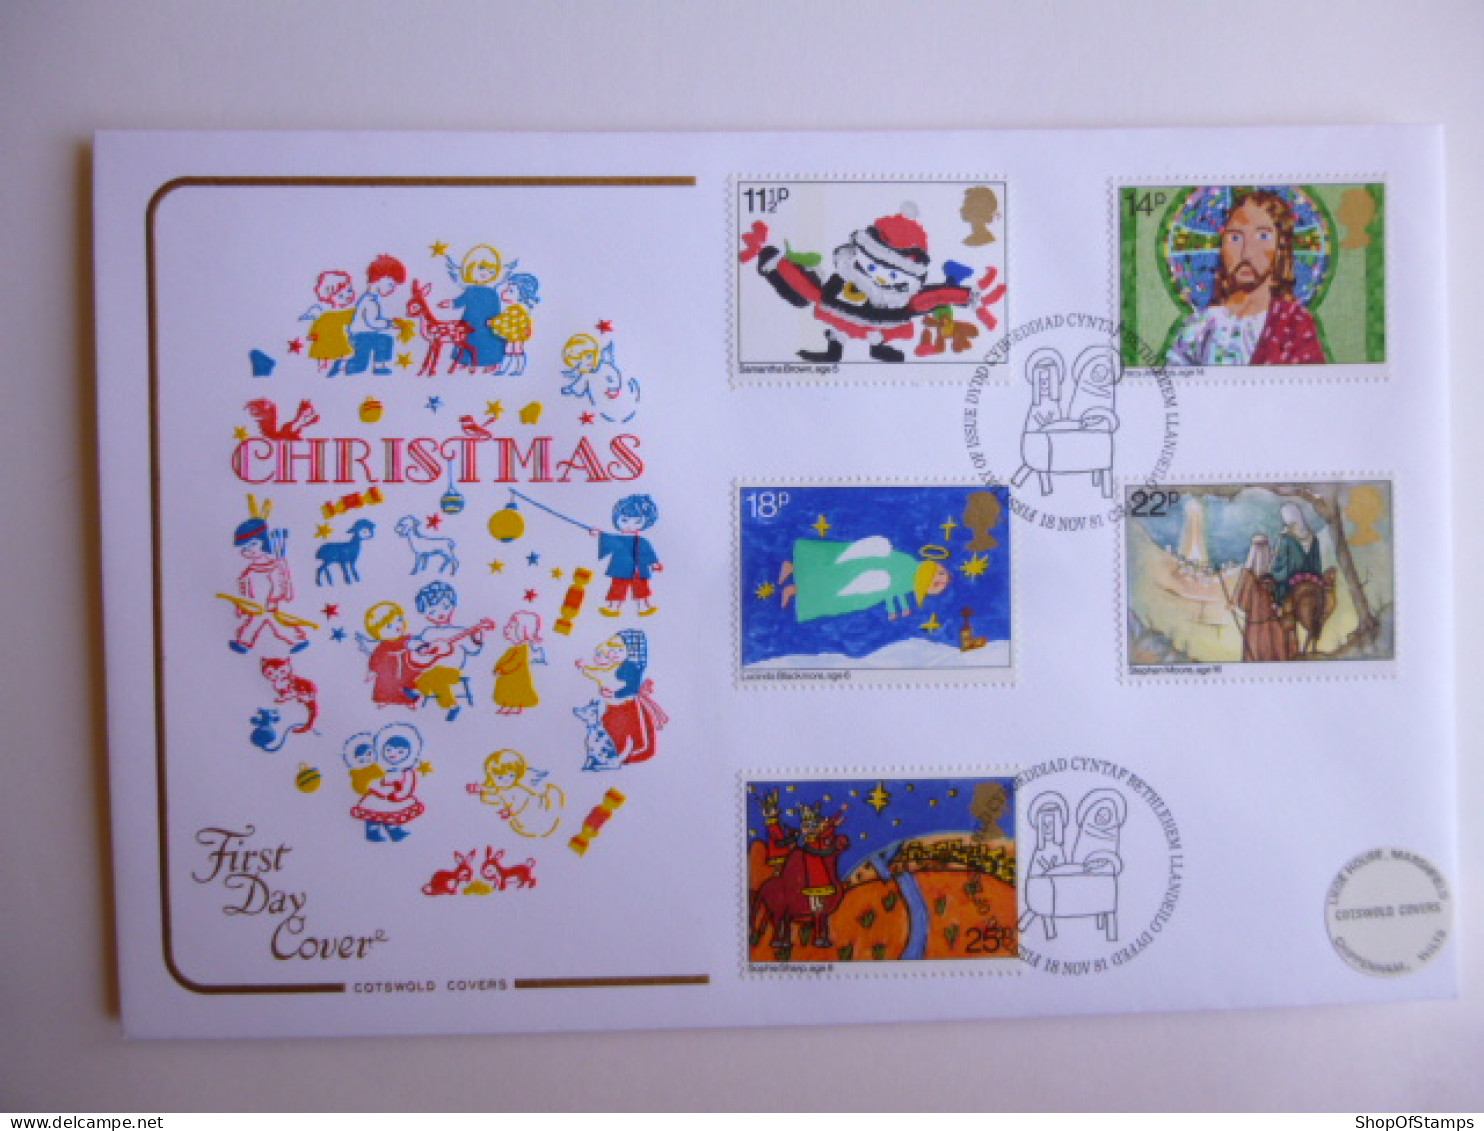 GREAT BRITAIN SG 1170-74 CHRISTMAS CHILDREN PICTURES   FDC LLANDEILO DYFED - Unclassified